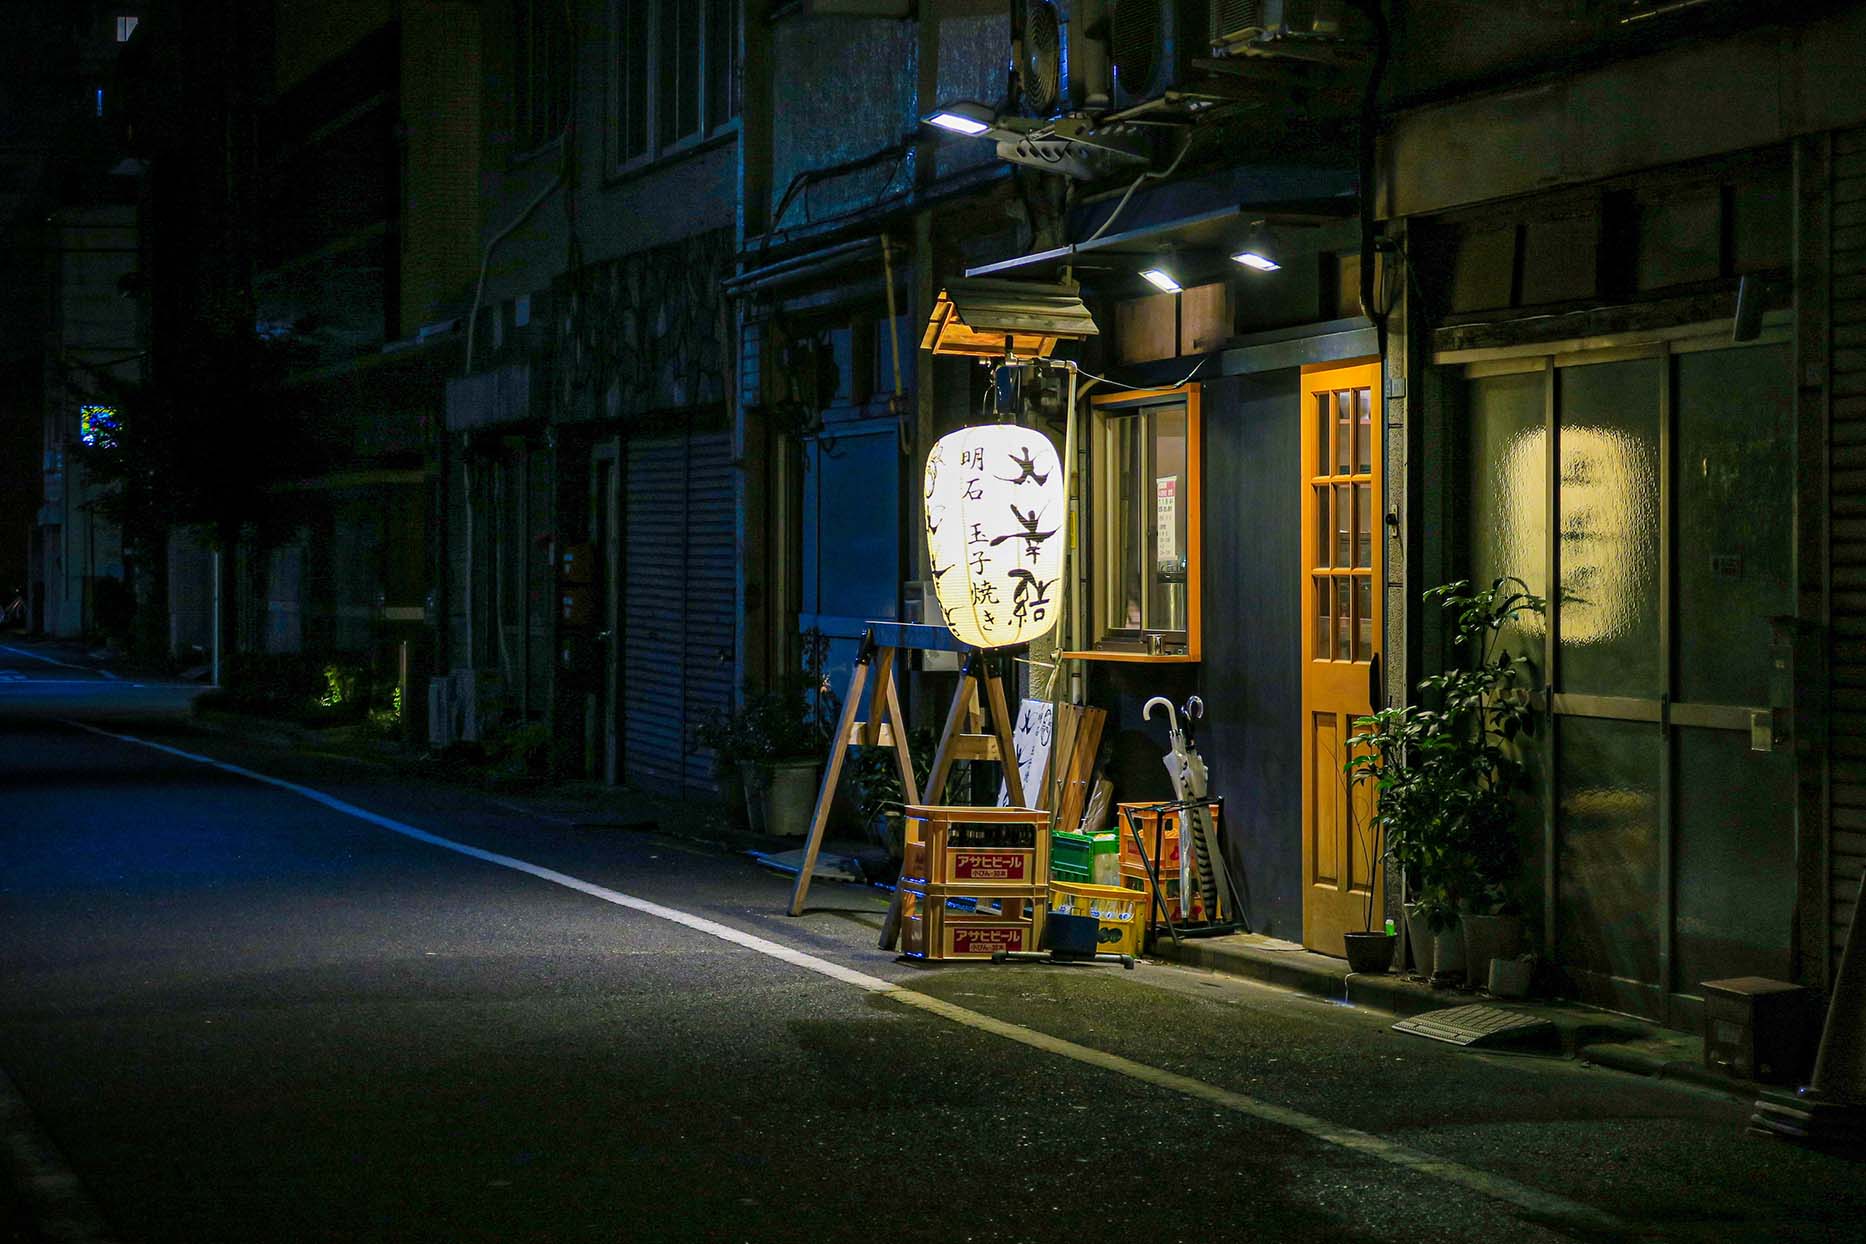 A restaurant entrance on a quiet street in Osaka.